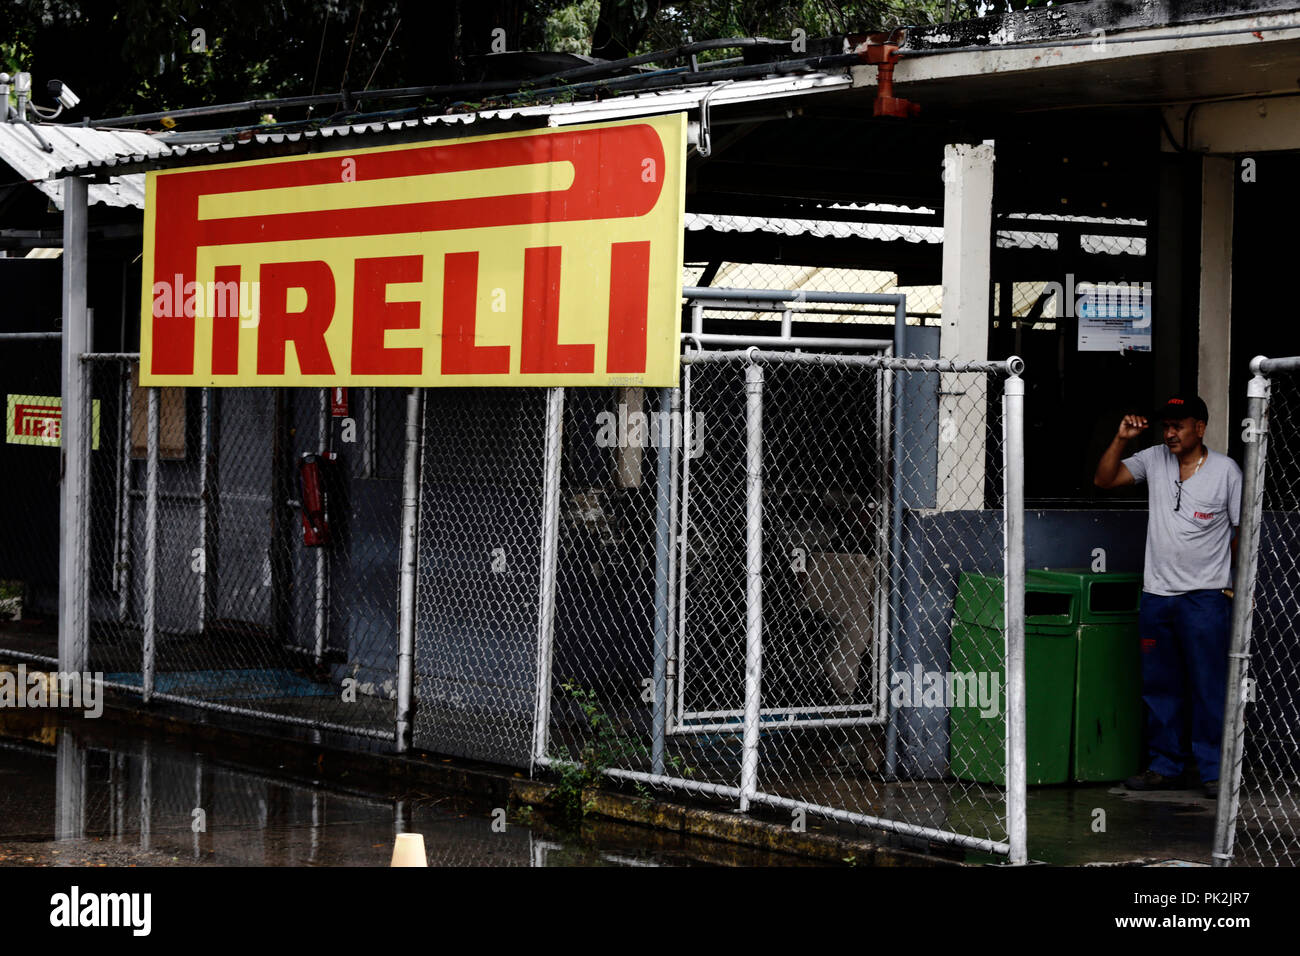 Guacara, Carabobo, Venezuela. 10th Sep, 2018. September 10, 2018. A worker waits at the entrance of the Pirelli tire factory. On Friday, the company was informed about the sale of the company to a South American consortium and that within the sale was the clause the acquisition of human resources. In Guacara, Carabobo state. Venezuela. Photo: Juan Carlos Hernandez Credit: Juan Carlos Hernandez/ZUMA Wire/Alamy Live News Stock Photo